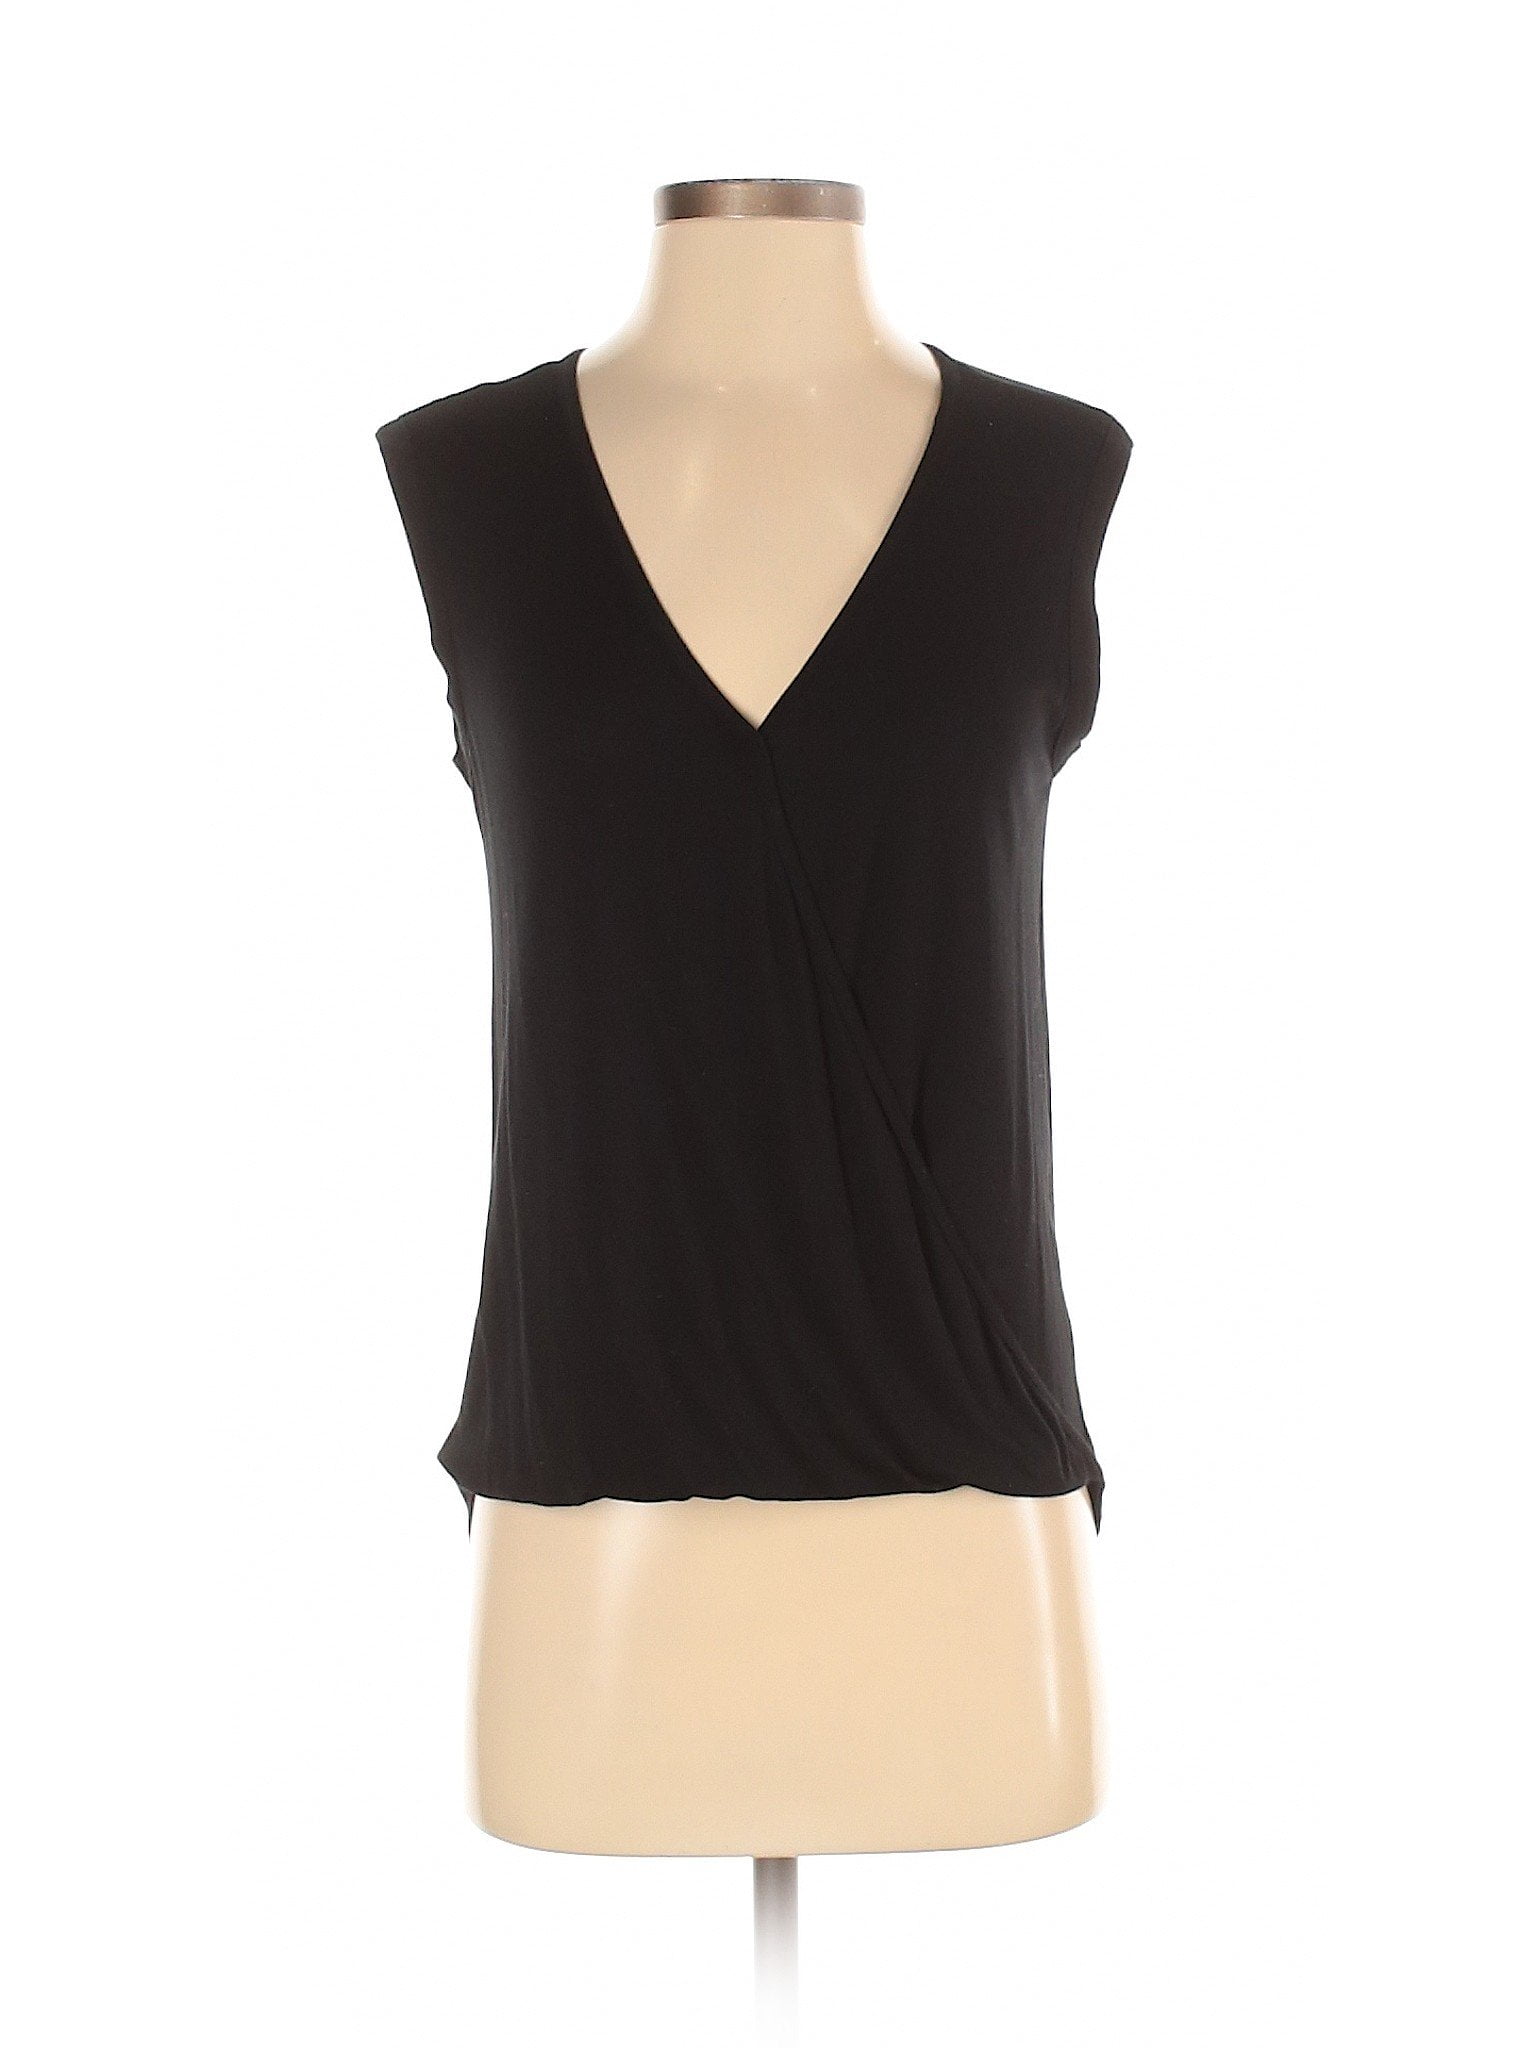 Capote - Pre-Owned Capote Women's Size XS Sleeveless Top - Walmart.com ...